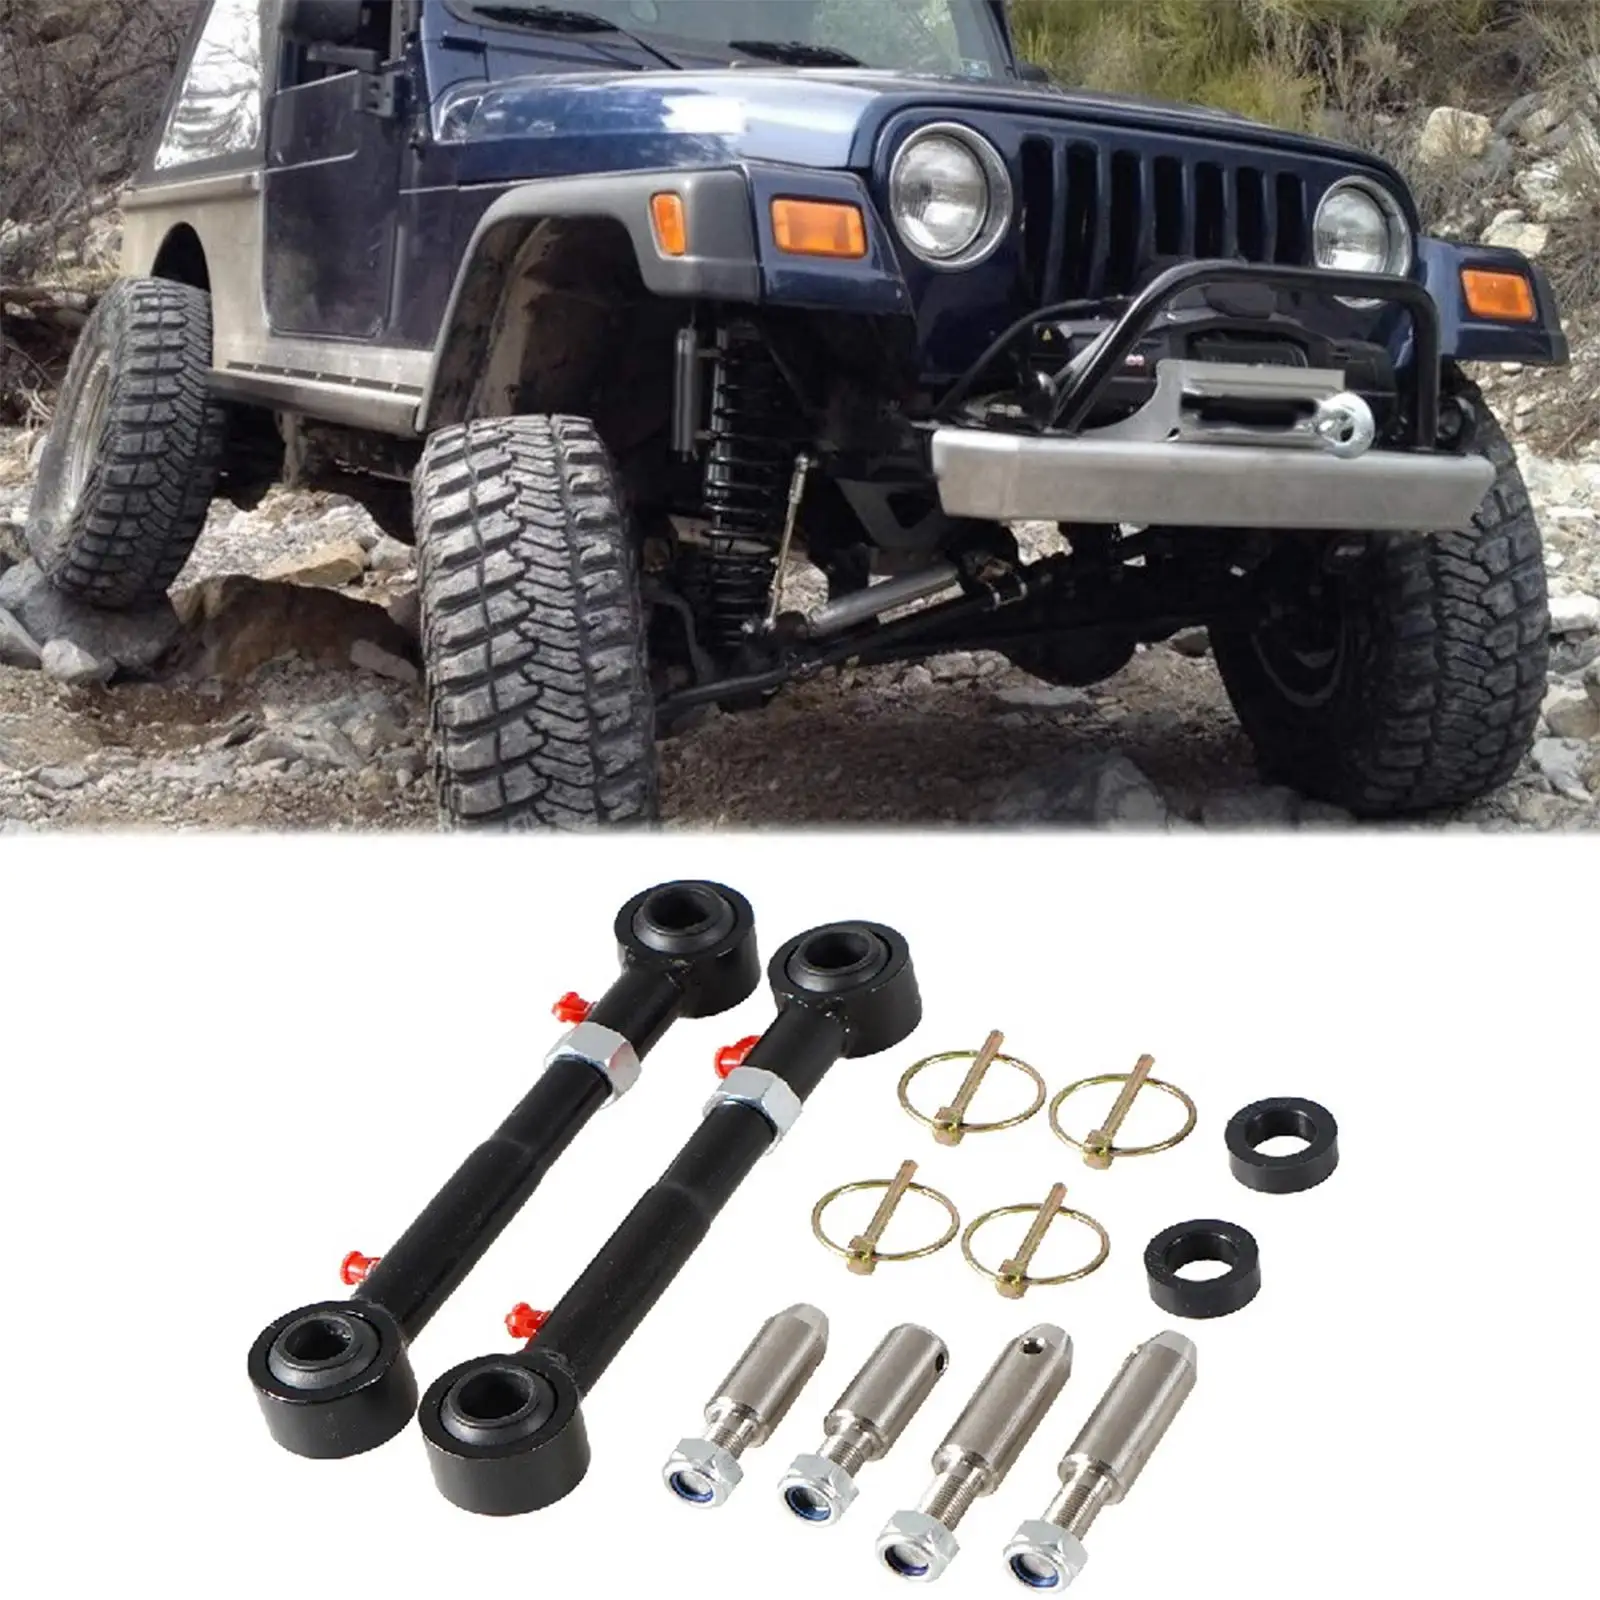 Front Sway Bar Links Disconnects Fit for Jeep Wrangler JK Jku 07-18 Parts